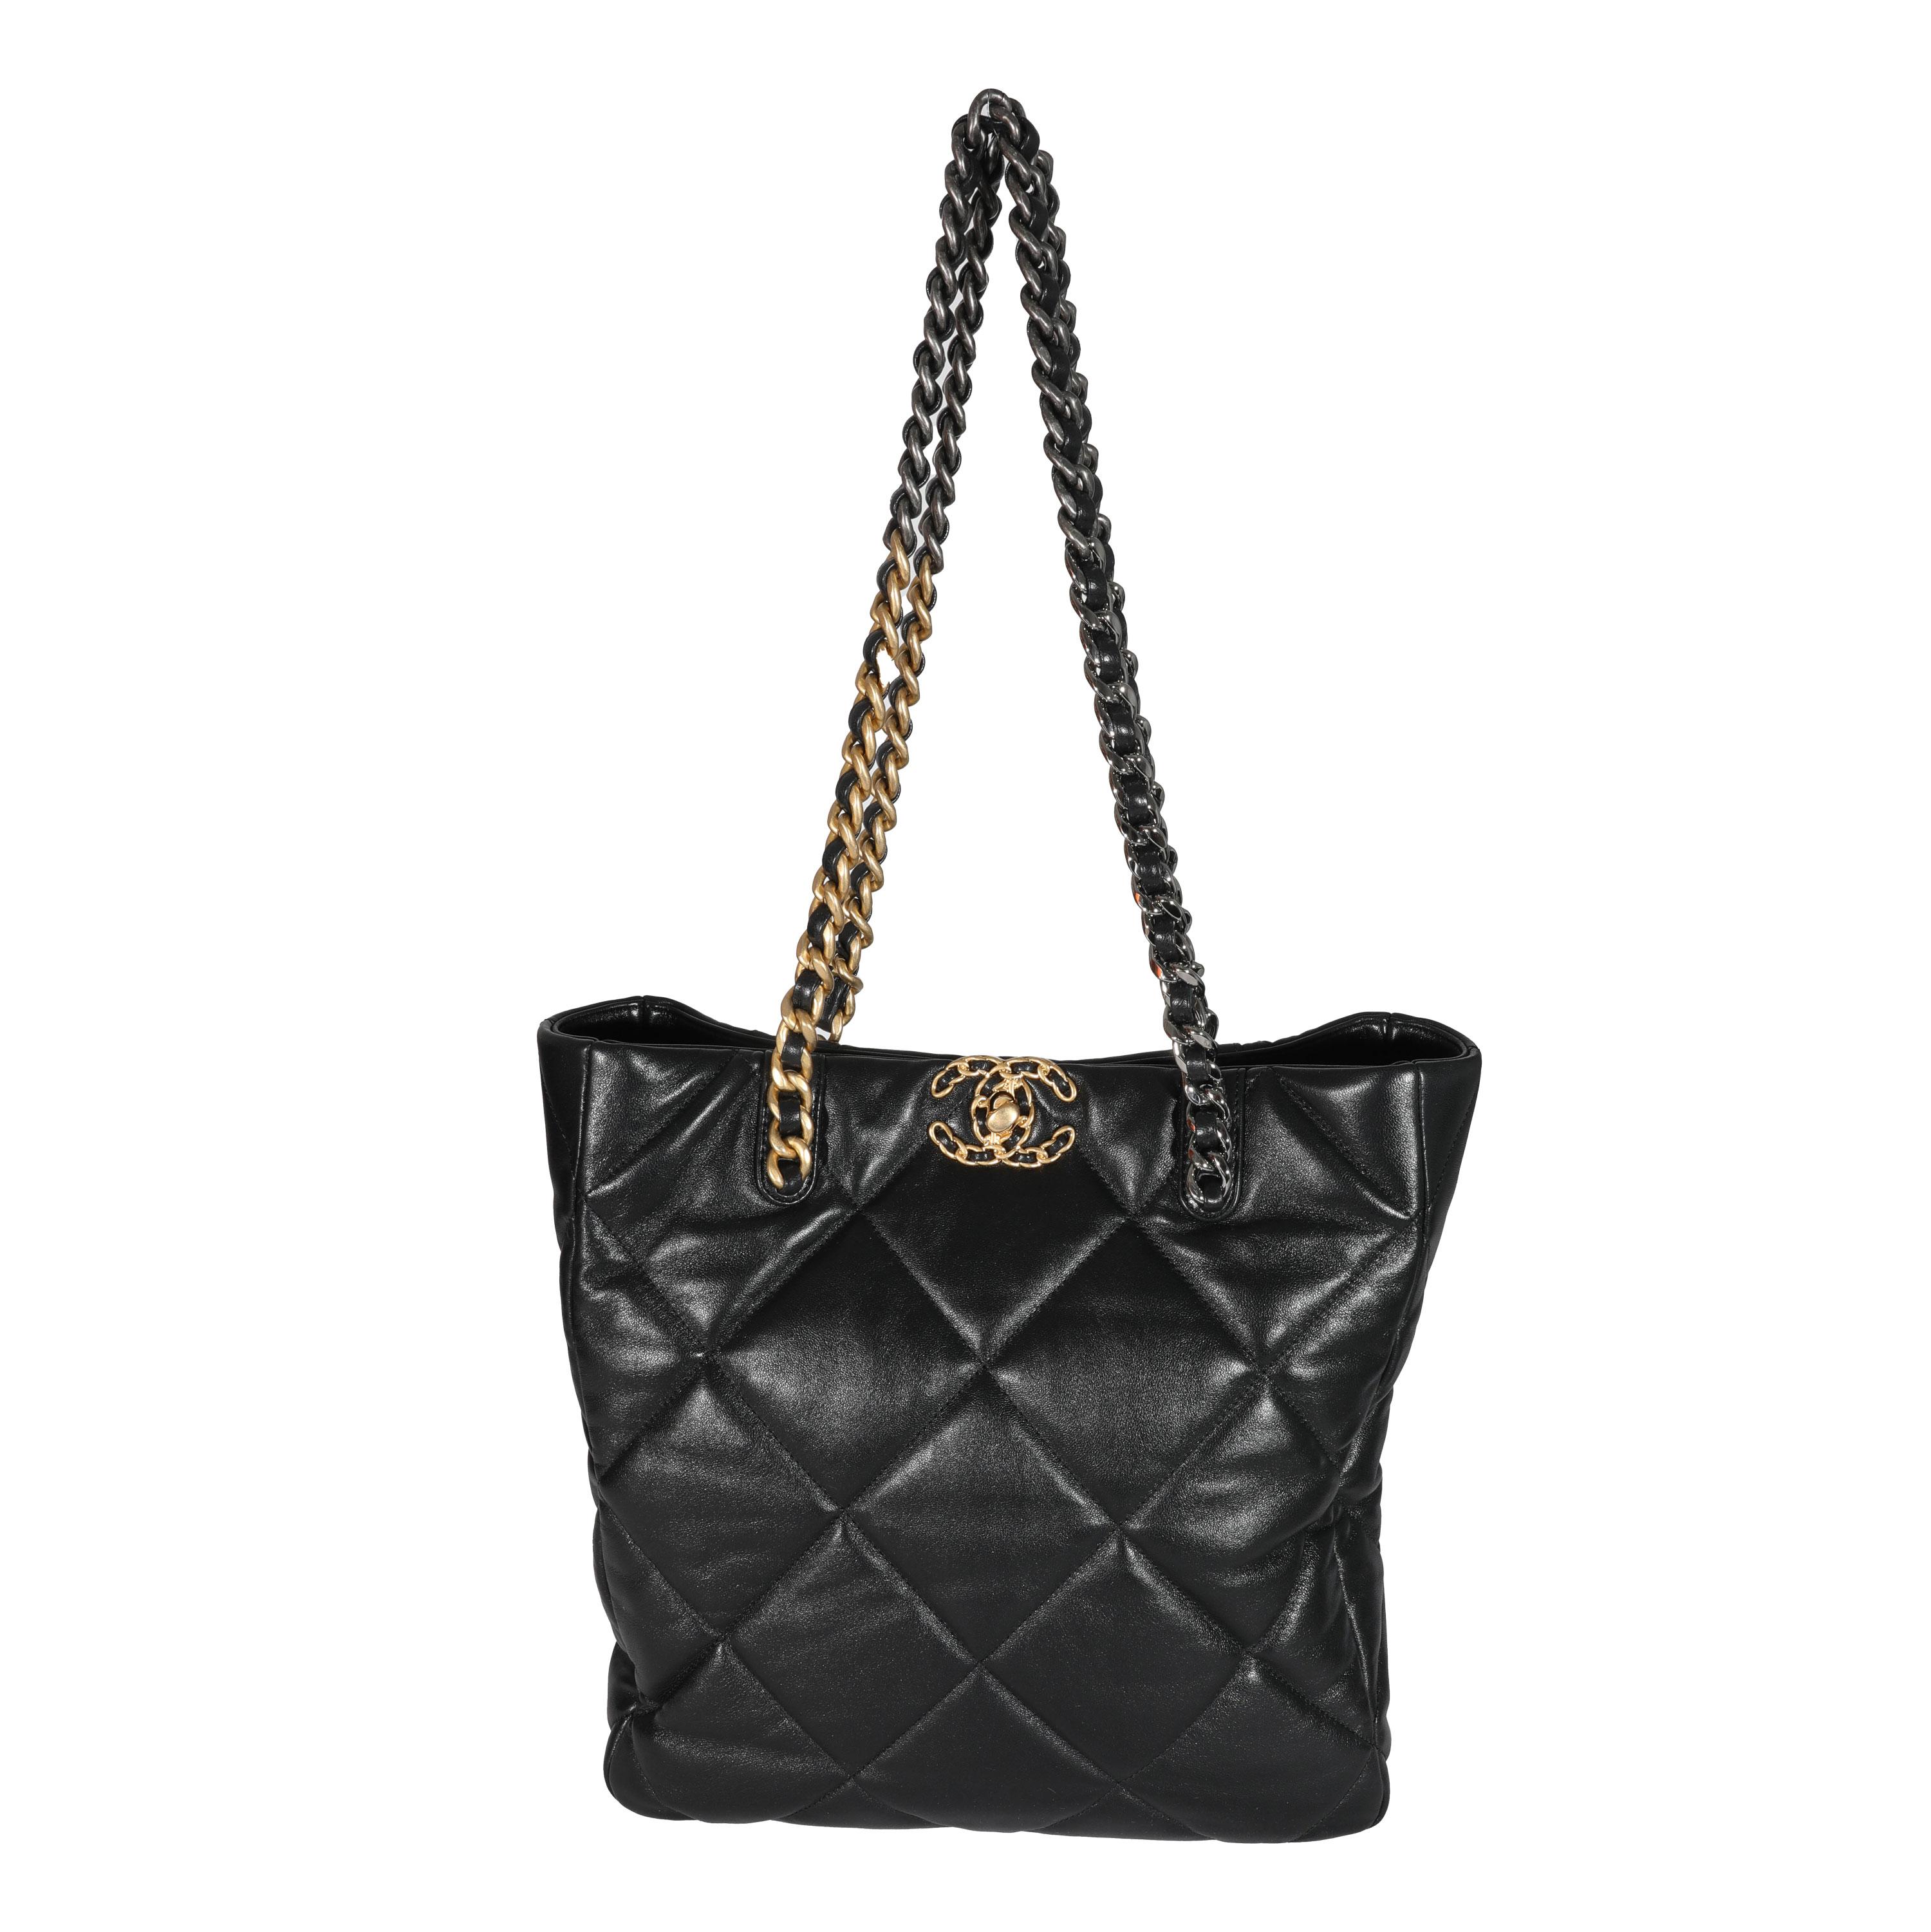 Women's or Men's Chanel Black Lambskin Quilted Chanel 19 Shopping Bag